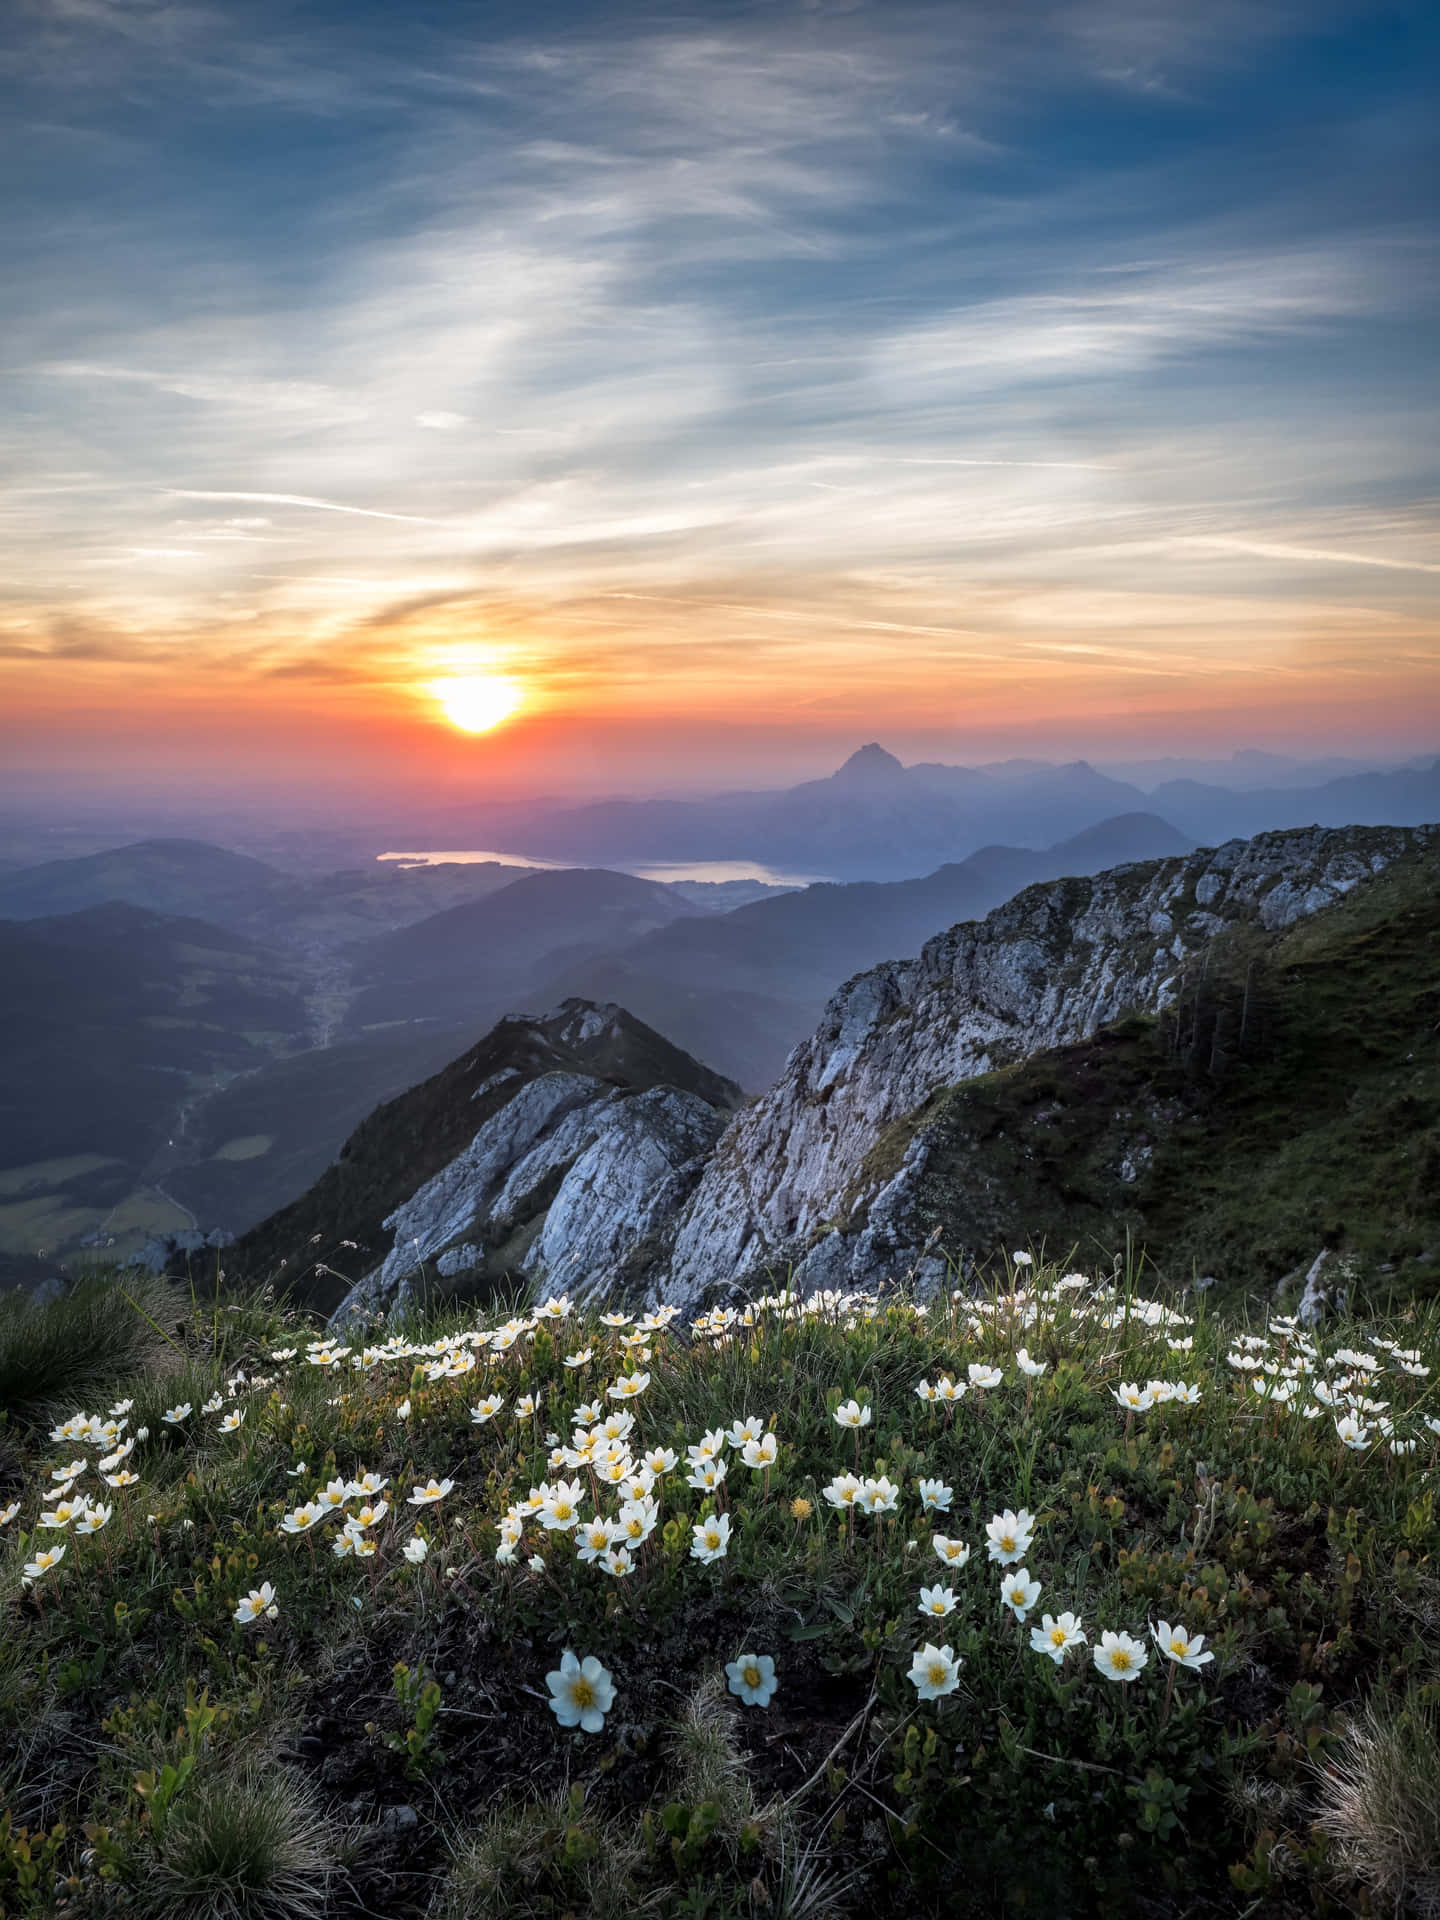 Mountain Peak With Sunset Pretty Nature Picture